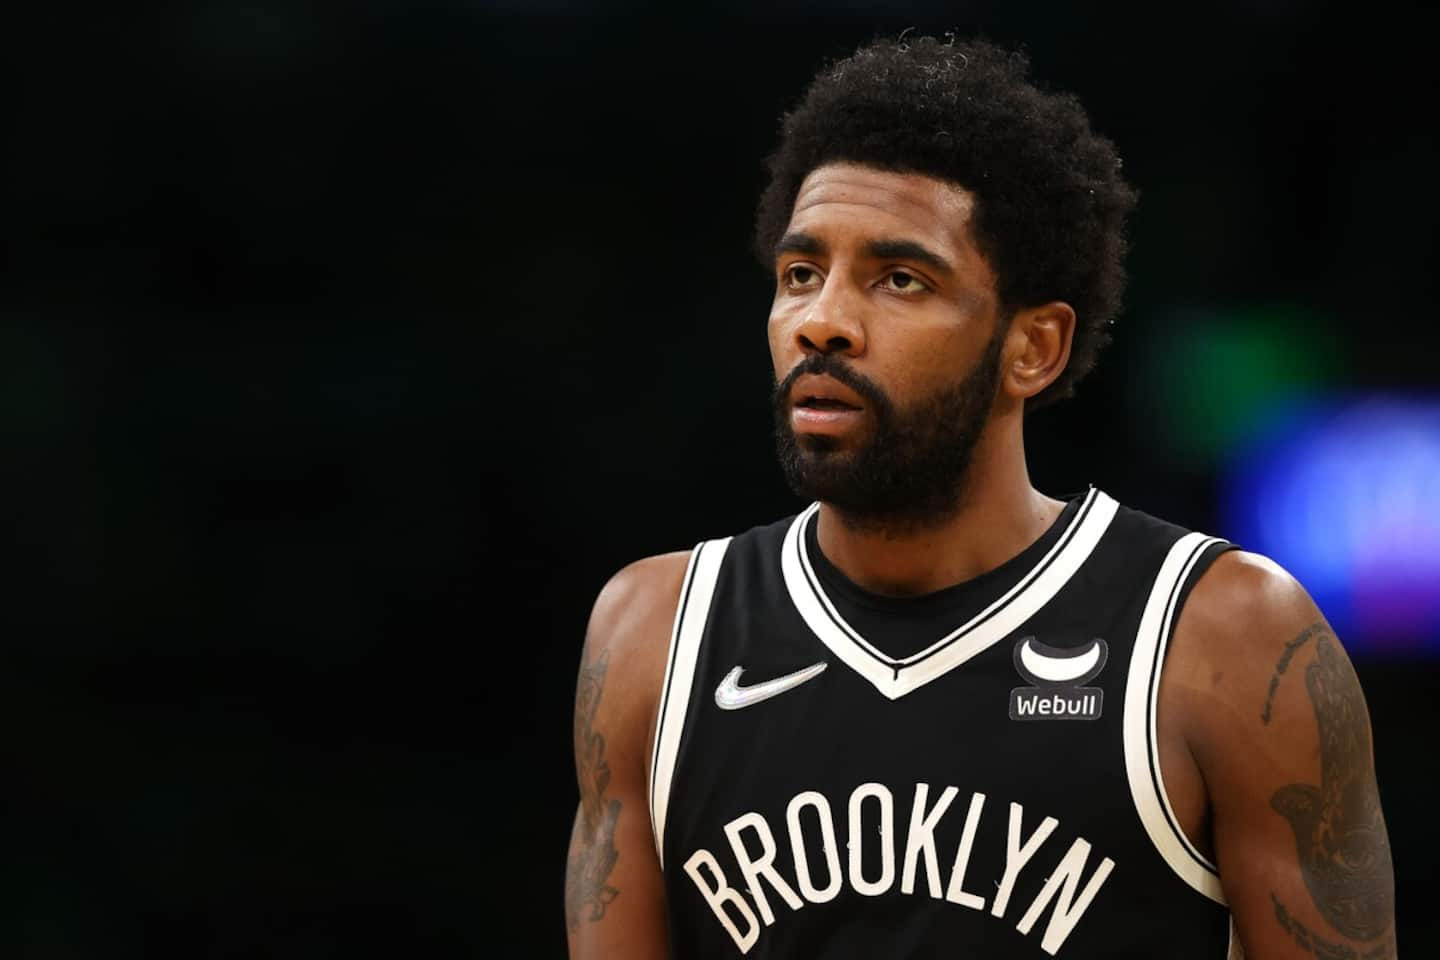 Kyrie Irving is said to be leaving